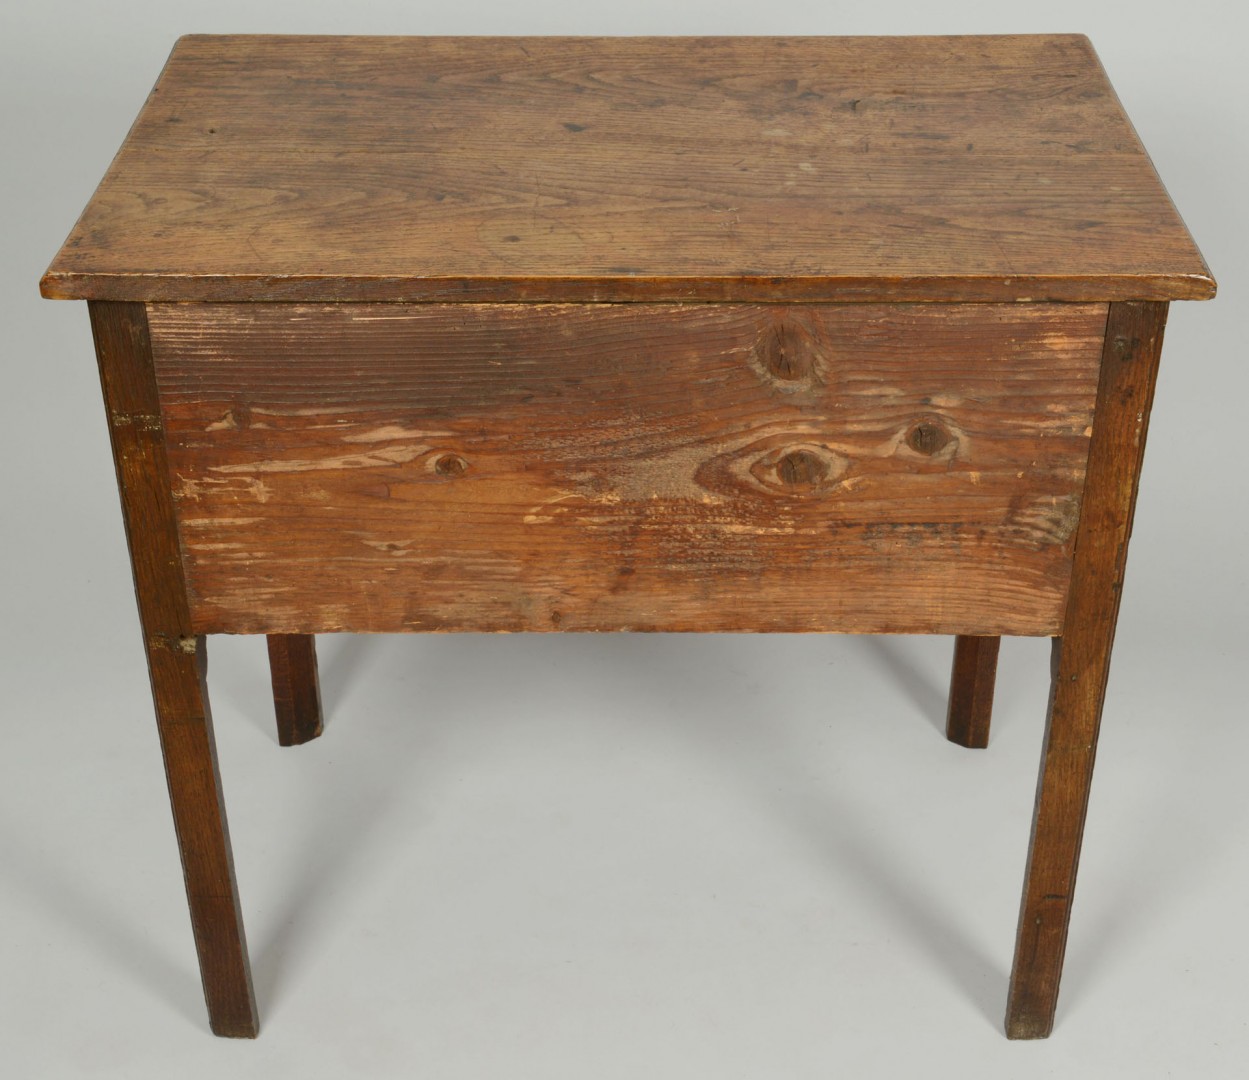 Lot 343: English Chippendale 2 drawer server, 18th cent.